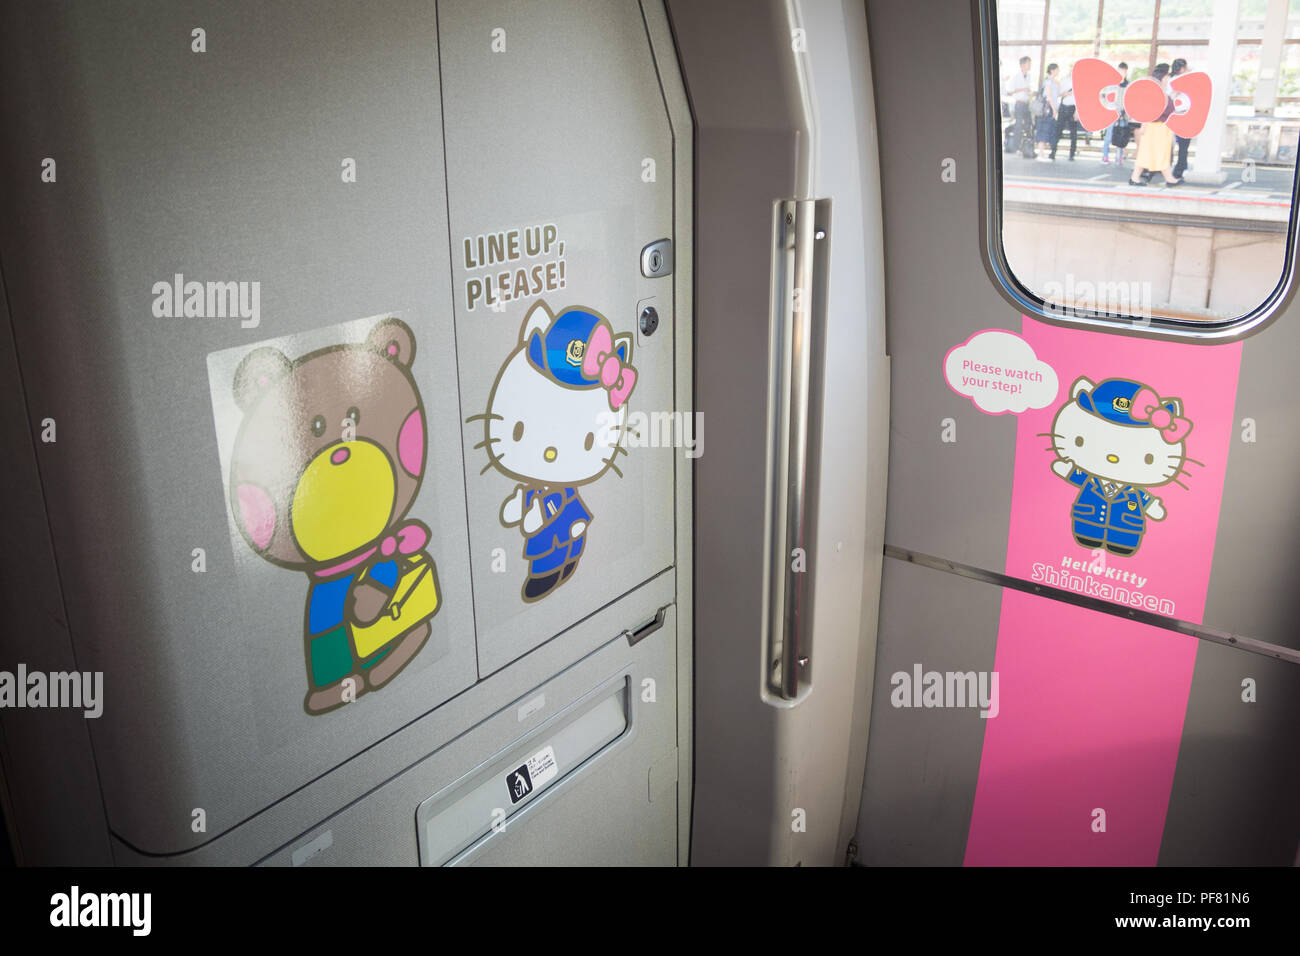 The interior of the Hello Kitty shinkansen (Hello Kitty bullet train), which is decorated with Hello Kitty and other Sanrio characters. Japan. Stock Photo